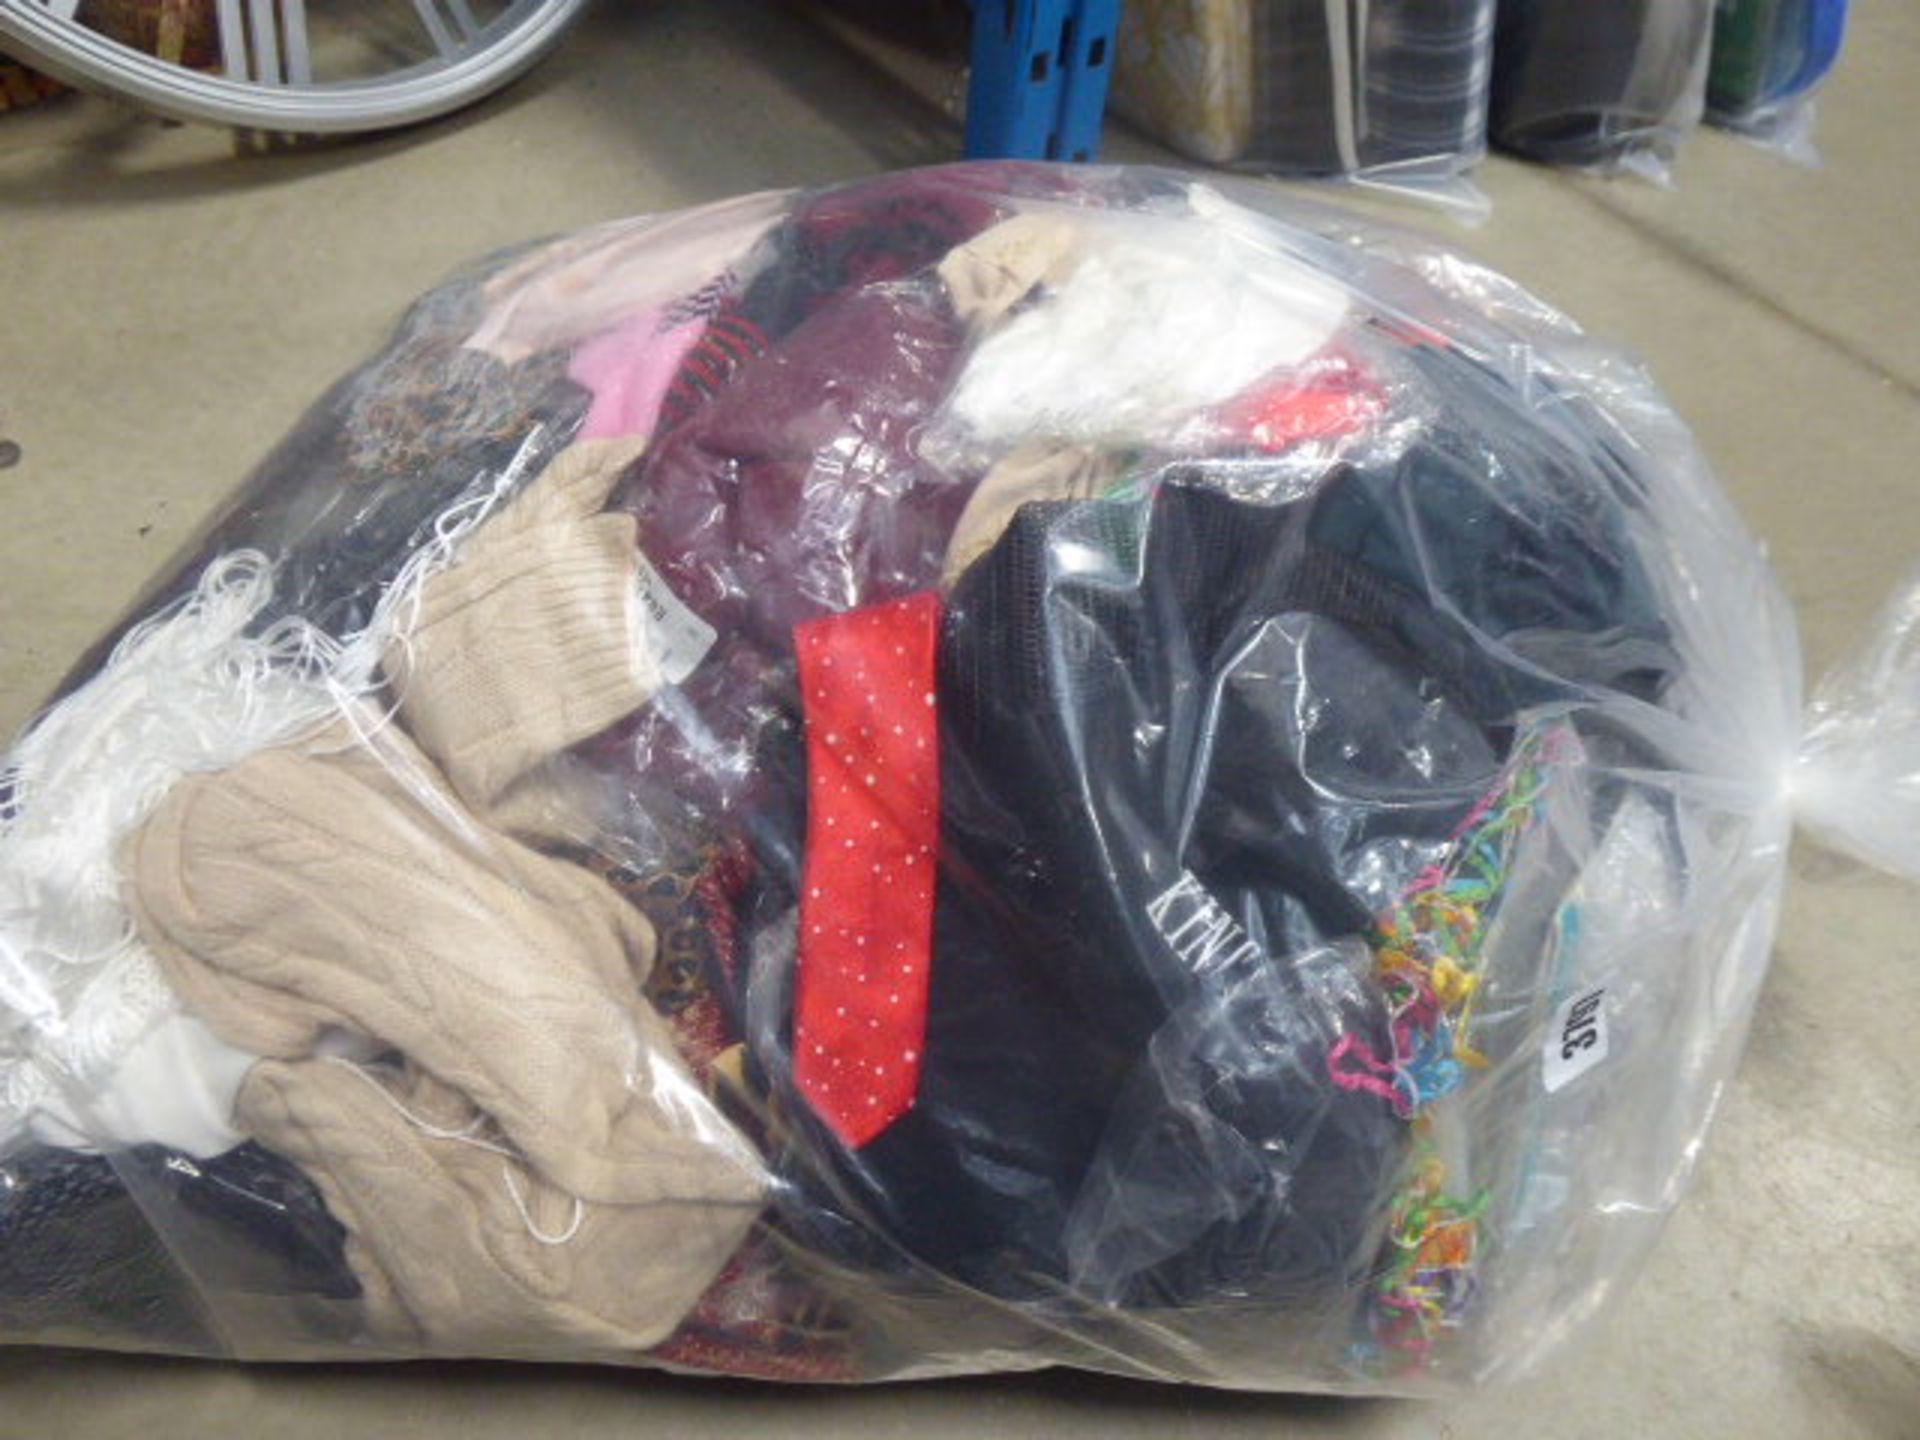 Large bag of mixed clothing accessories